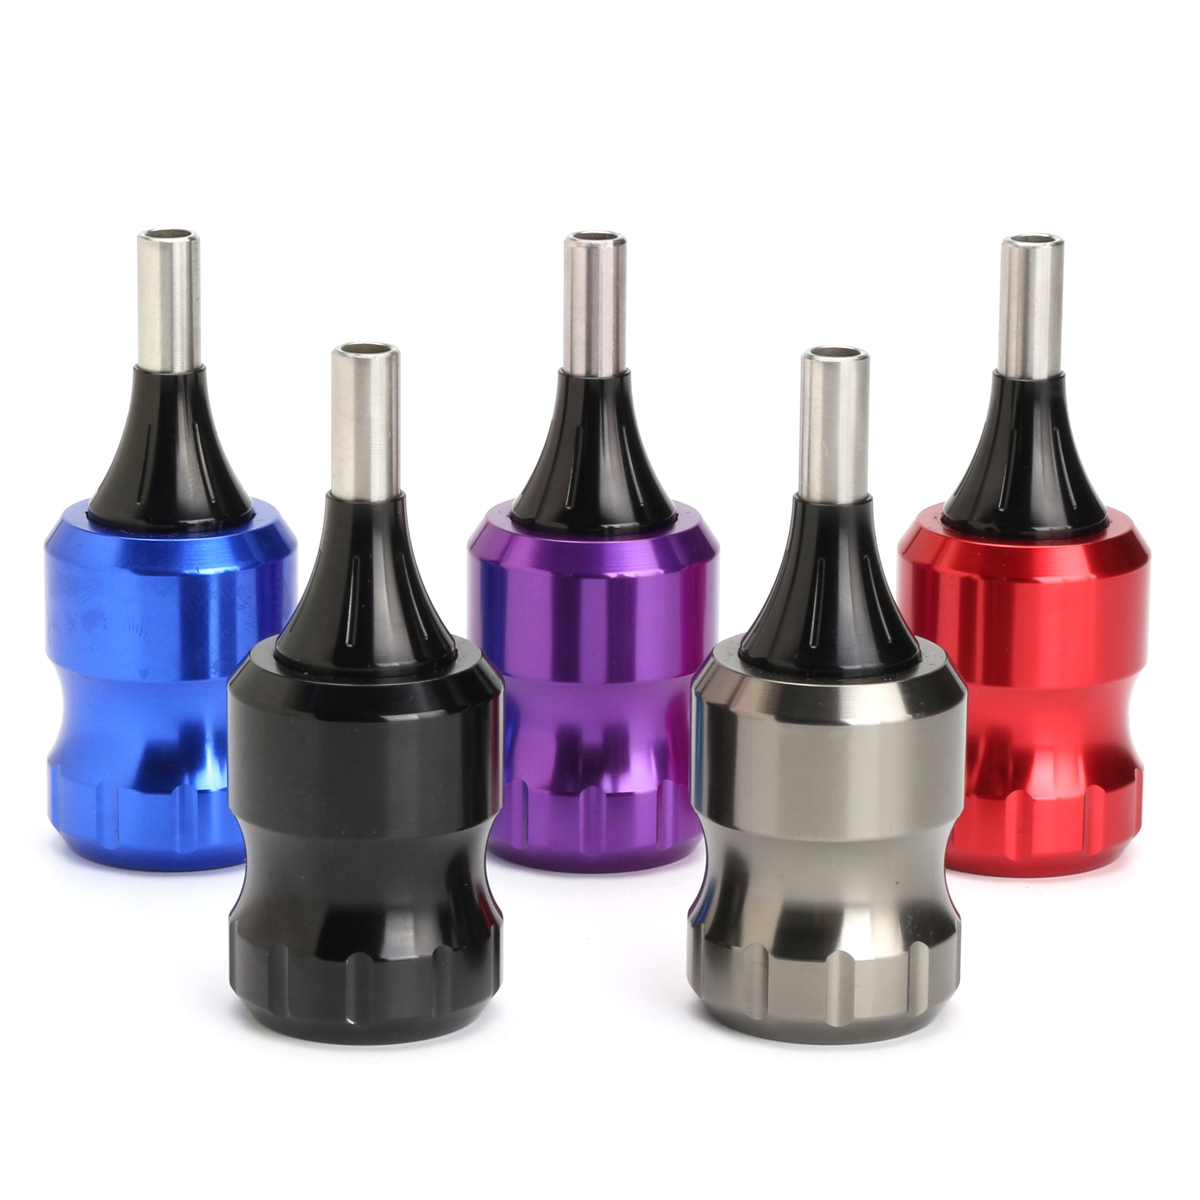 Find 32MM Gear Buckle Tattoo Machine Aluminum Alloy Handle Grips Tubes Magnum Flat Mandrel Tools Kit for Sale on Gipsybee.com with cryptocurrencies